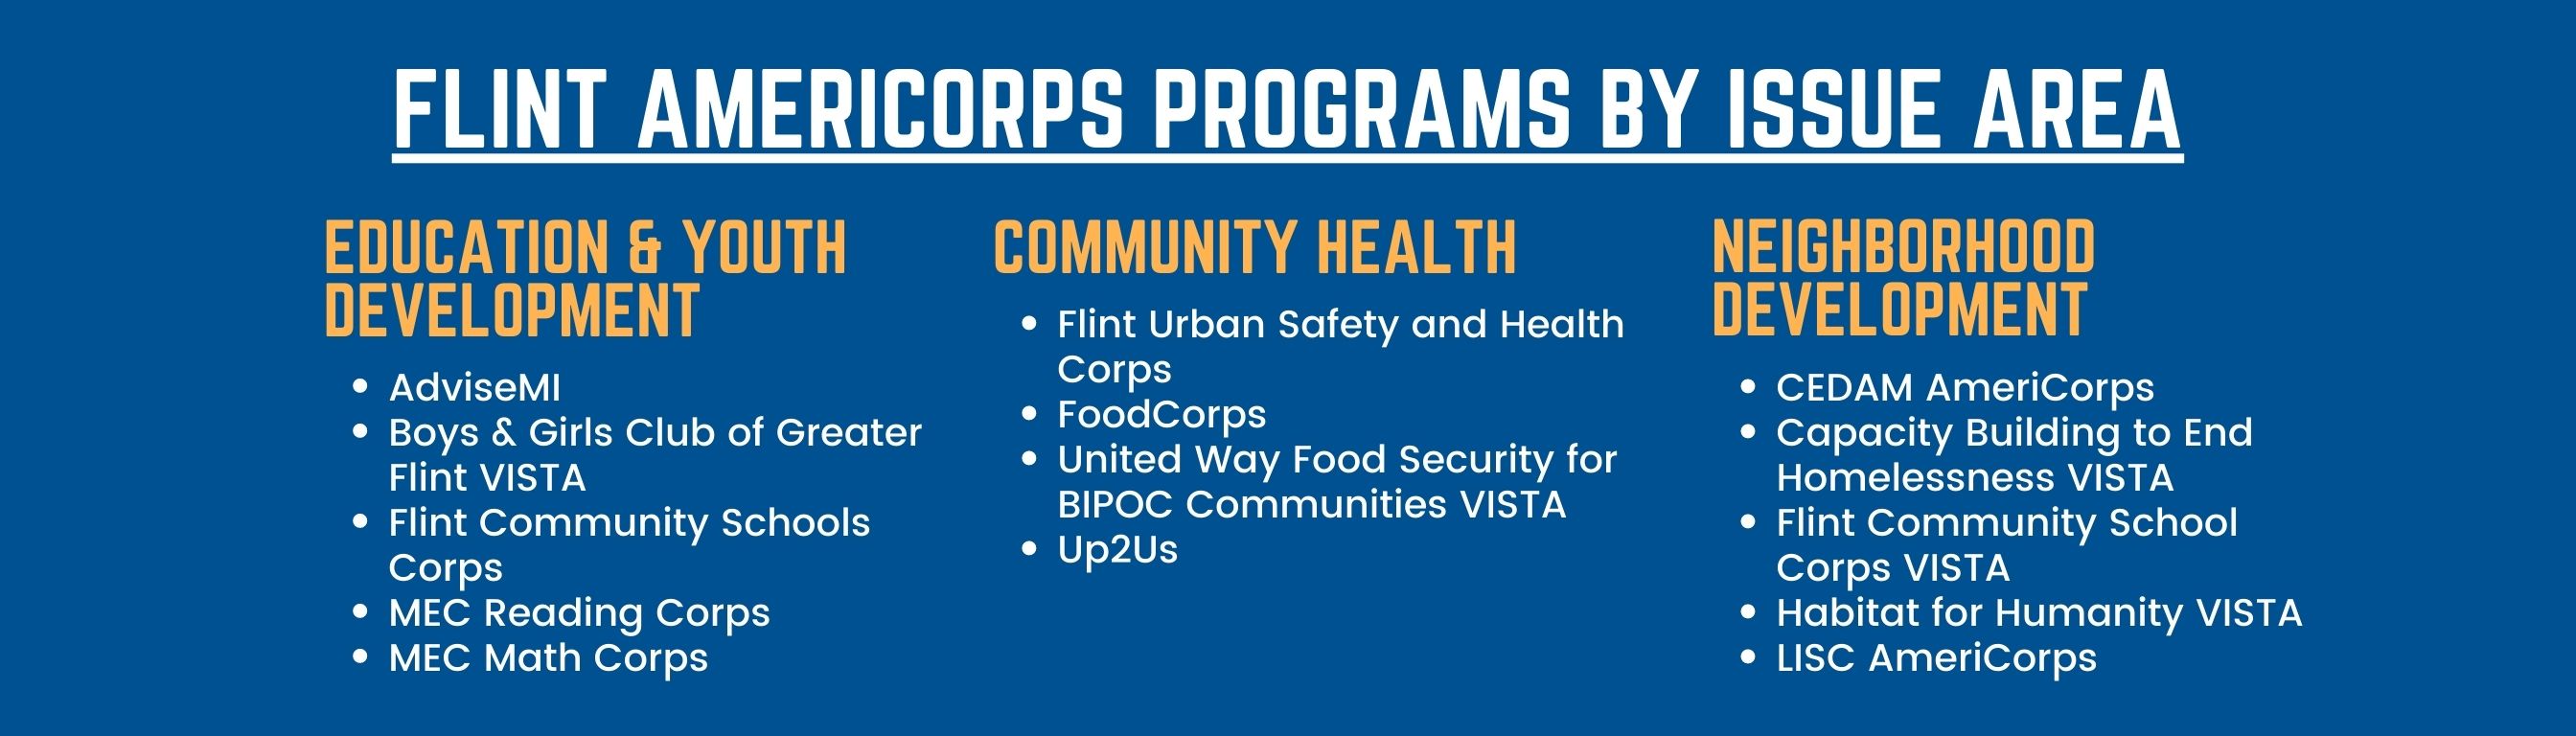 List of Flint AmeriCorps Programs by Issue Area